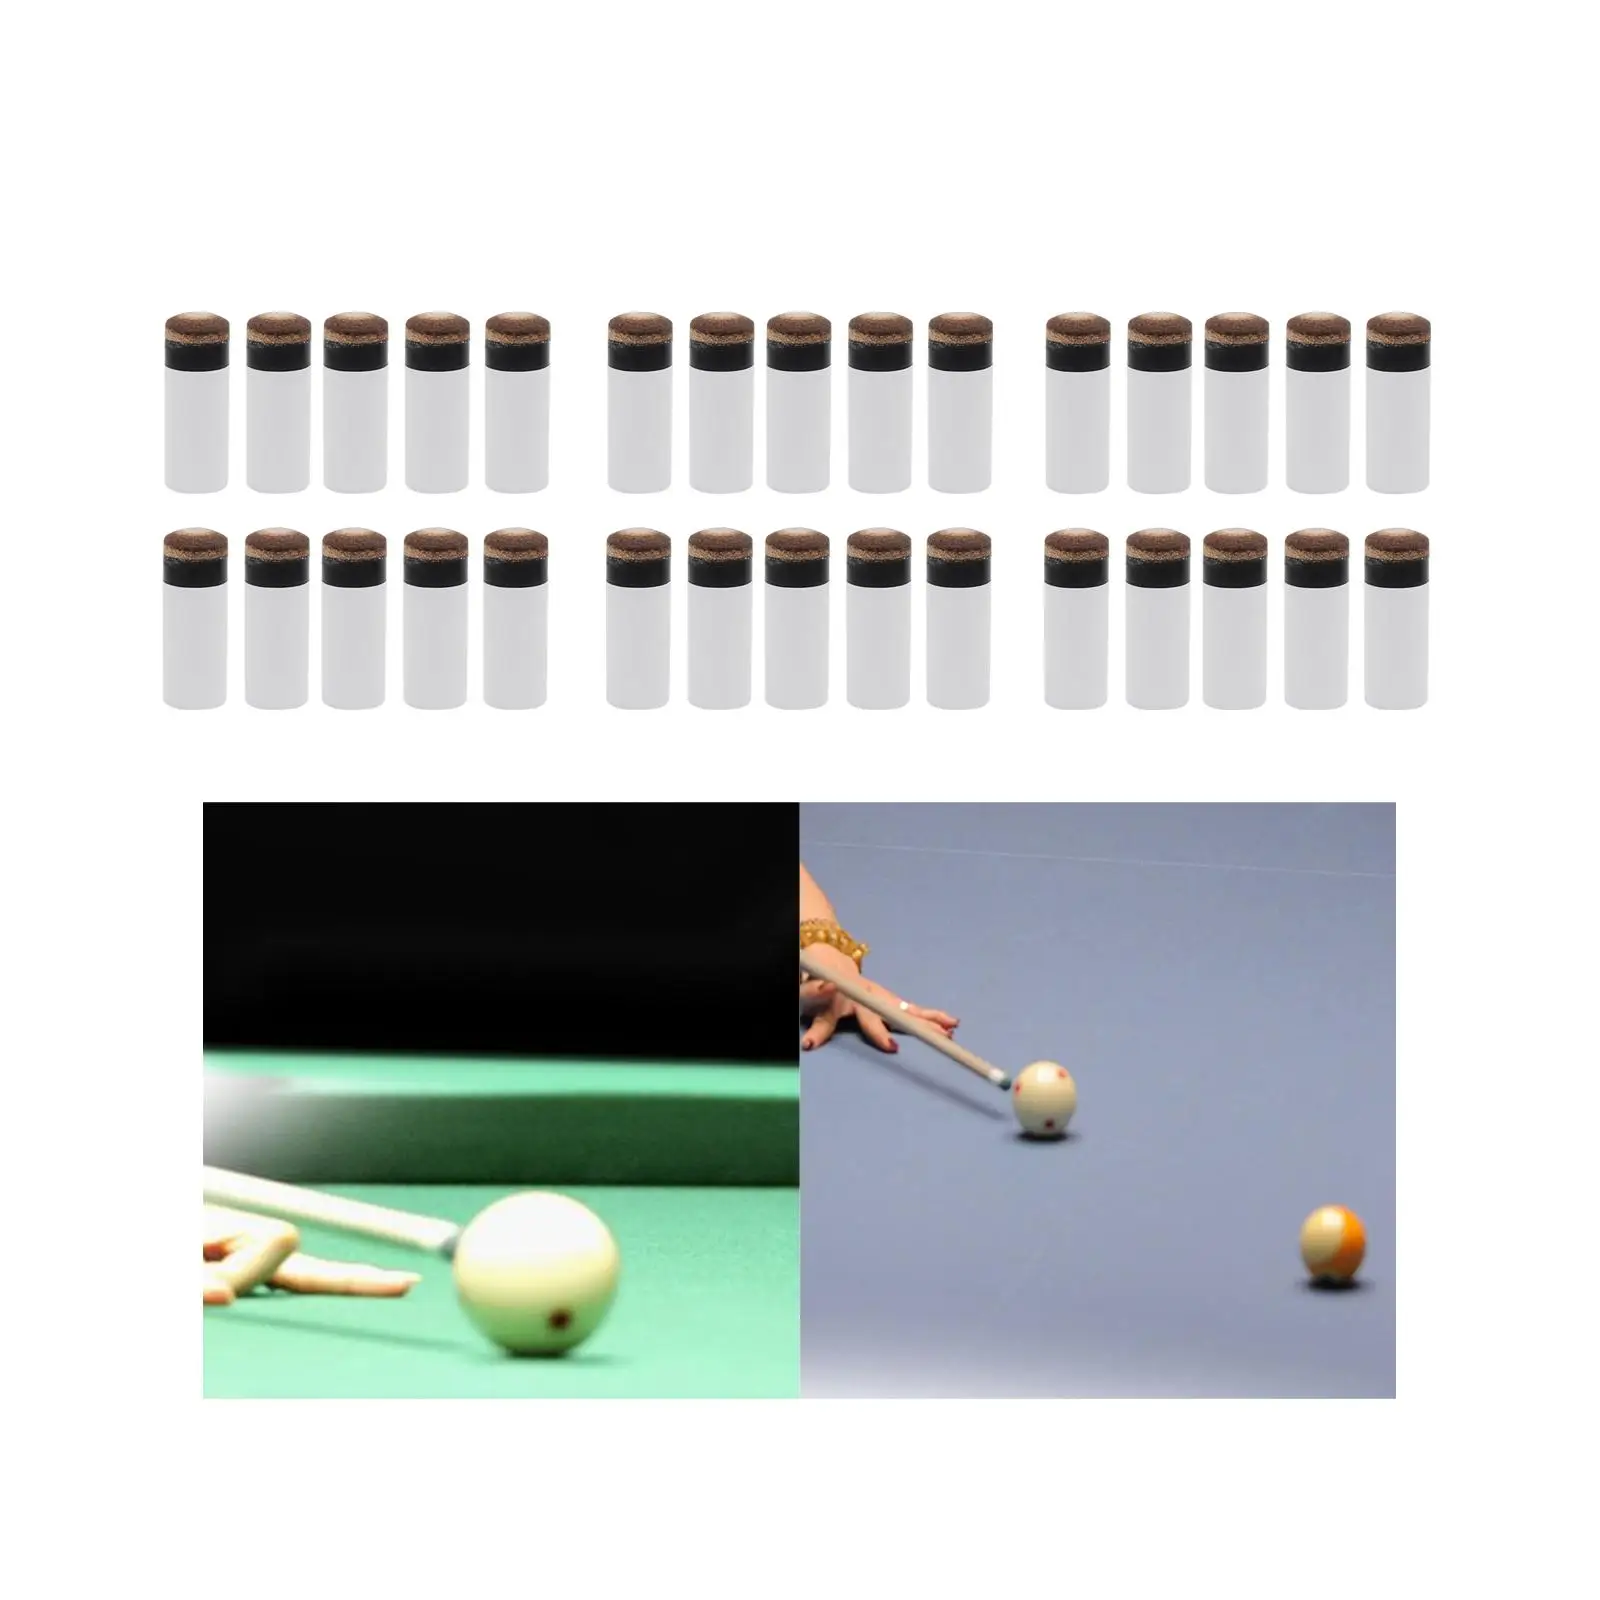 10Pcs Pool Cue Tips Screw on Cue Tips Professional Billiards Replacement with Pool Cue Ferrules Ferrules Pool Billiard Cues Tips